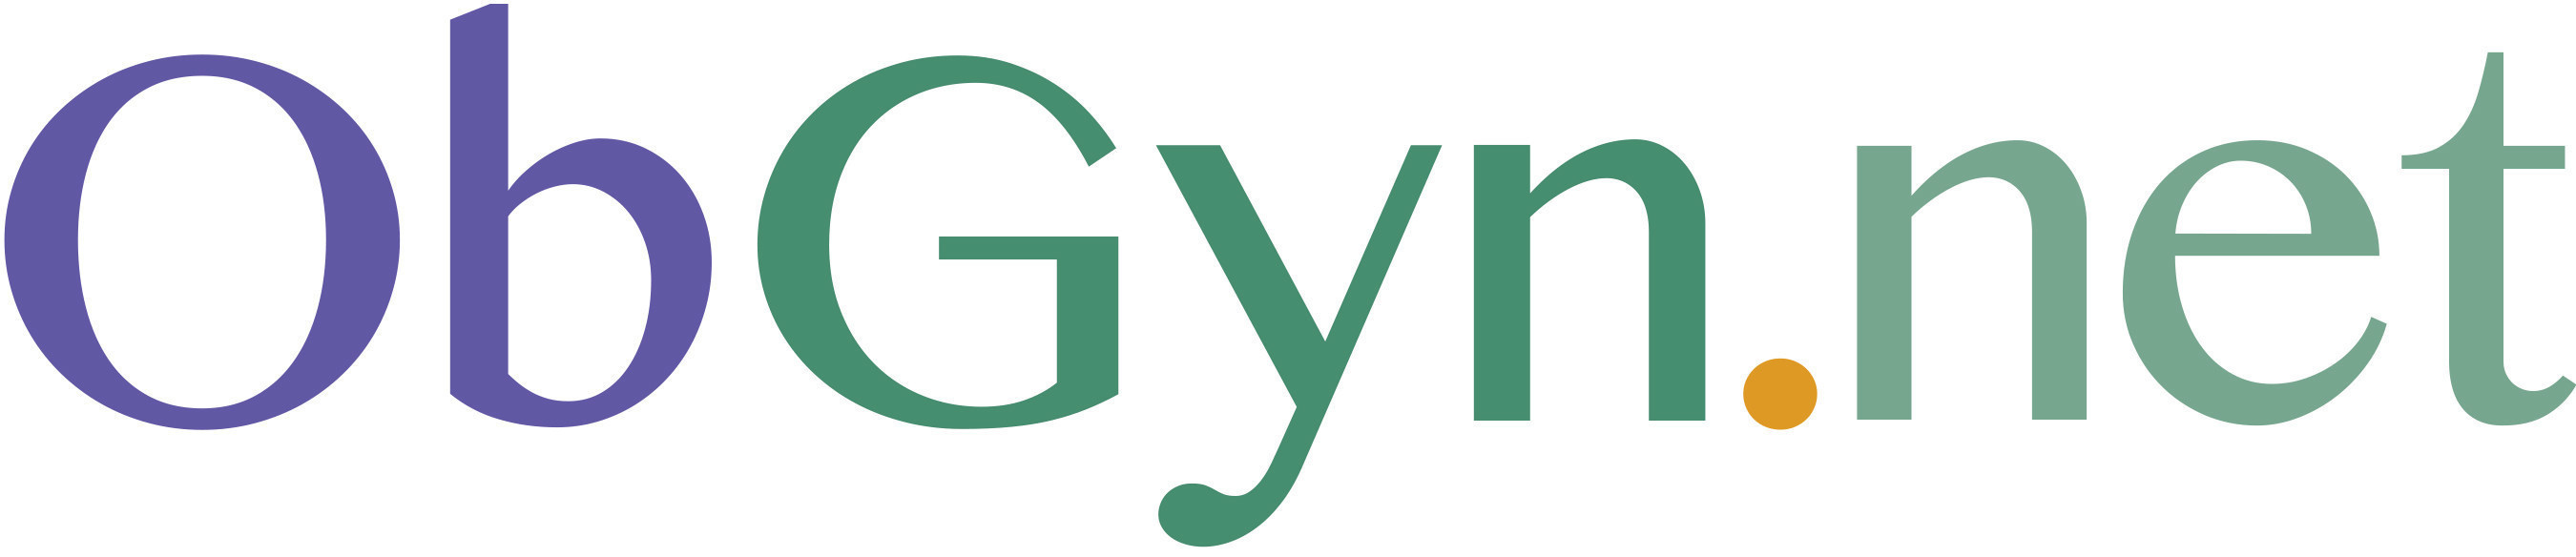 OBGYN.net Features Blogs on the Challenges of Practicing Obstetrics and Gynecology